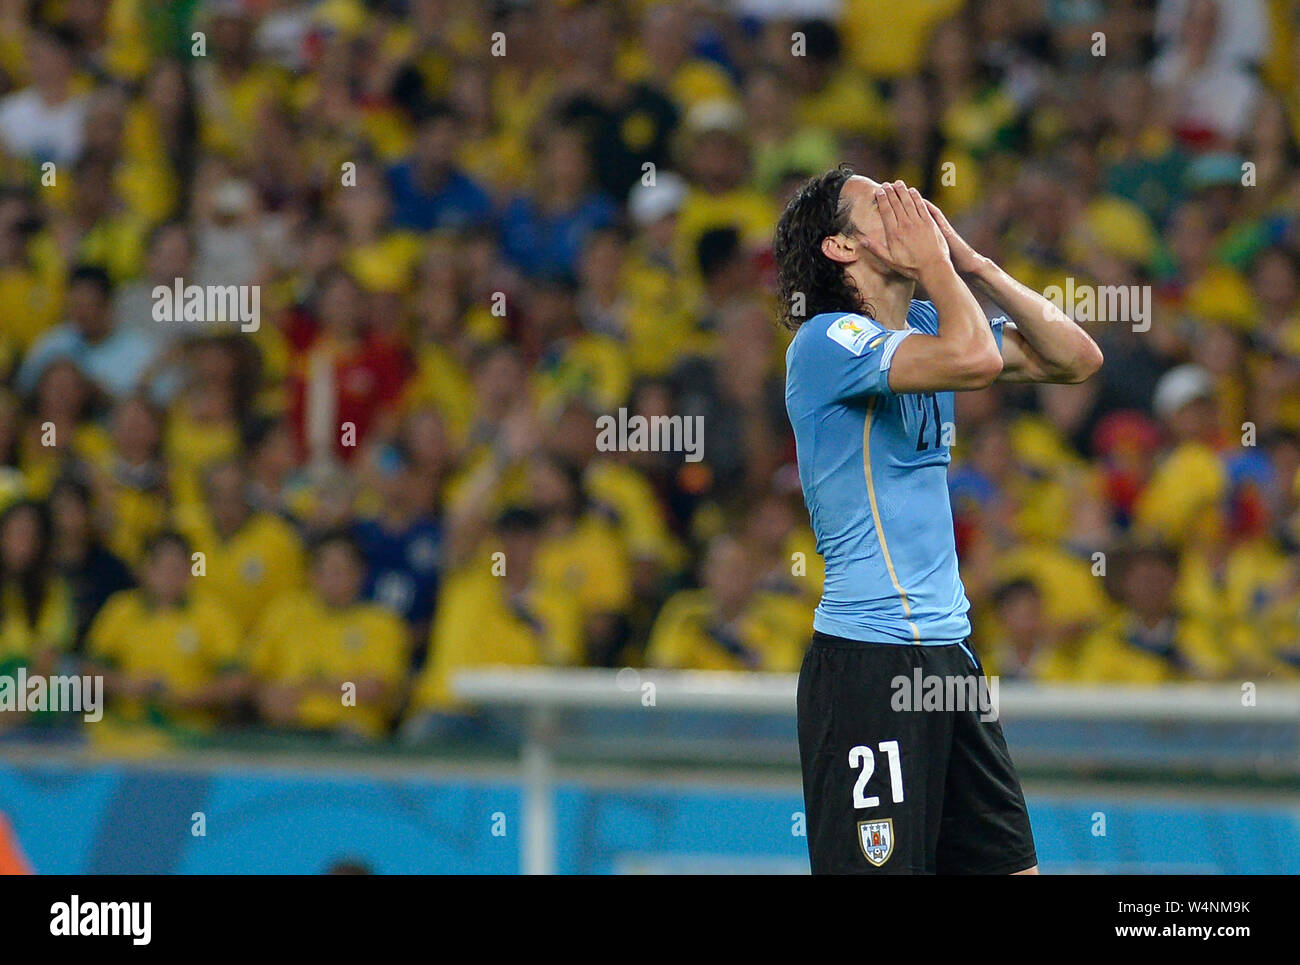 Uruguayan soccer player Cavani kicking a ball during the match Colombia vs Uruguay, for the 2014 World Cup at the Maracanã Stadium in Rio de Janeiro, Stock Photo